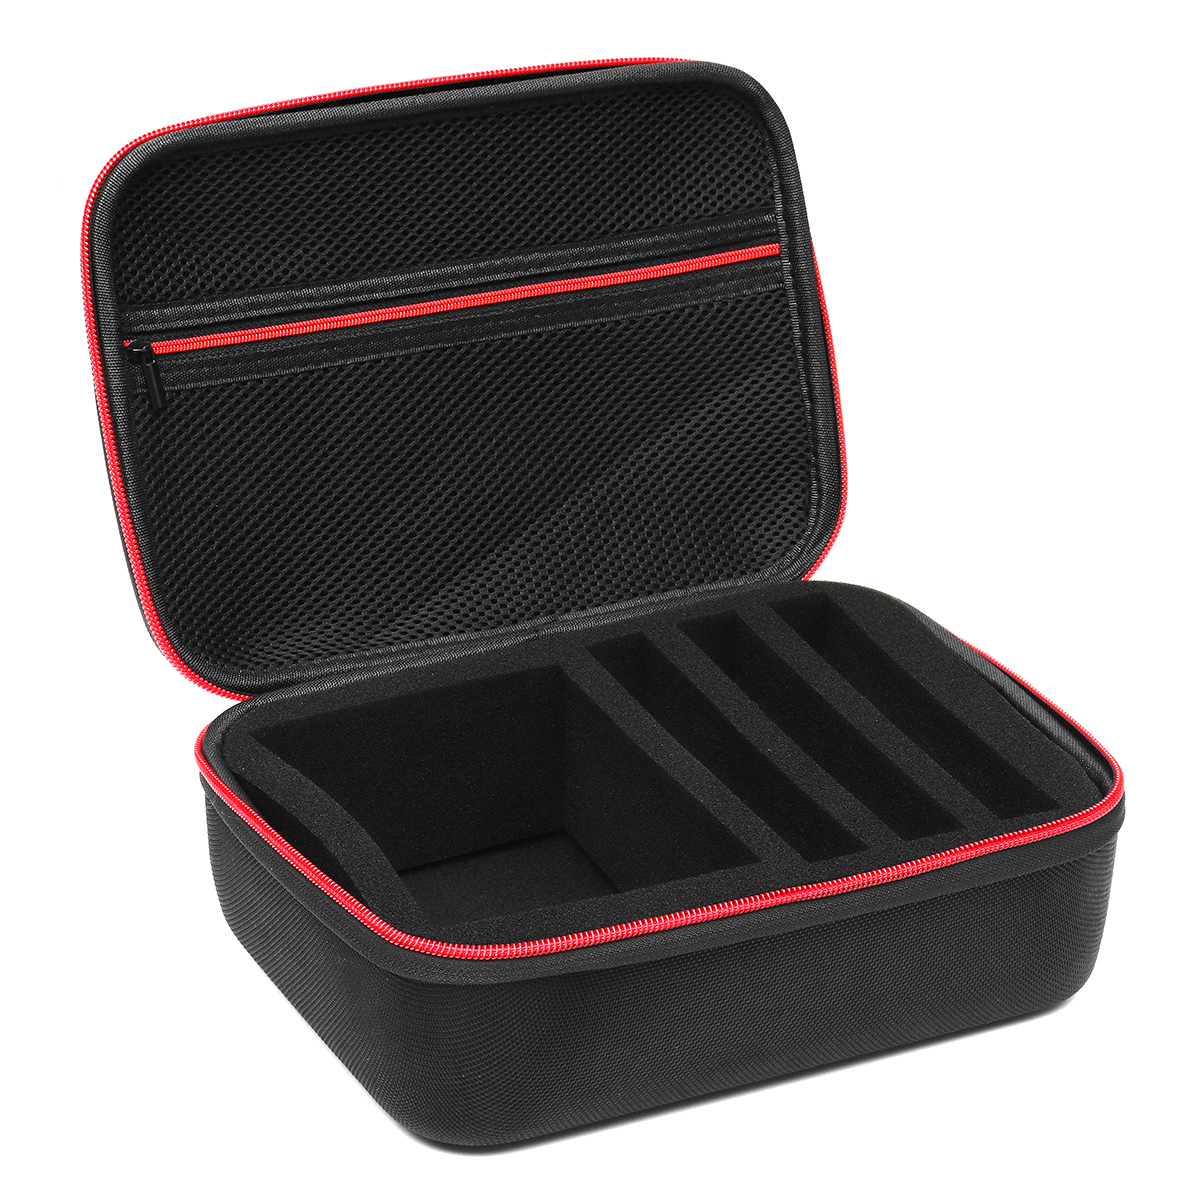 Portable Travel Storage Box Carry Case Bag For Nintendo Switch MINI SFC Game Console 9